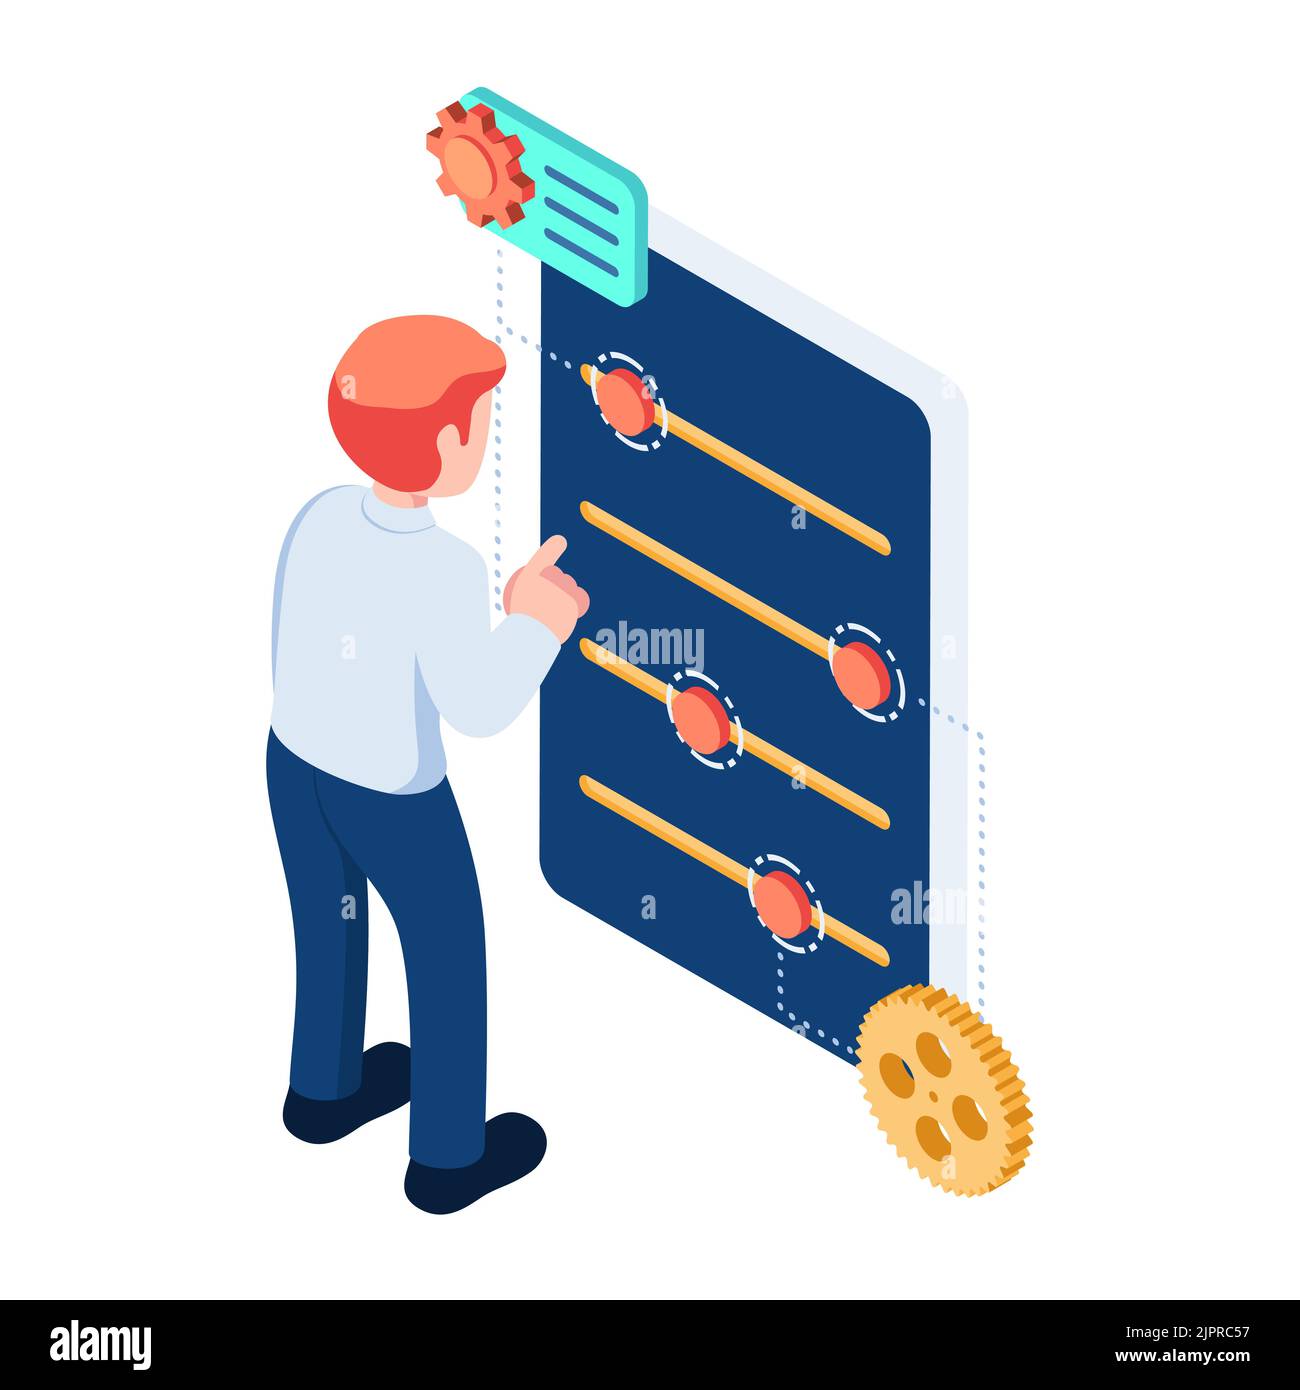 Flat 3d Isometric Businessman with Business Adjustment Panel. Business Adaptation Concept. Stock Vector